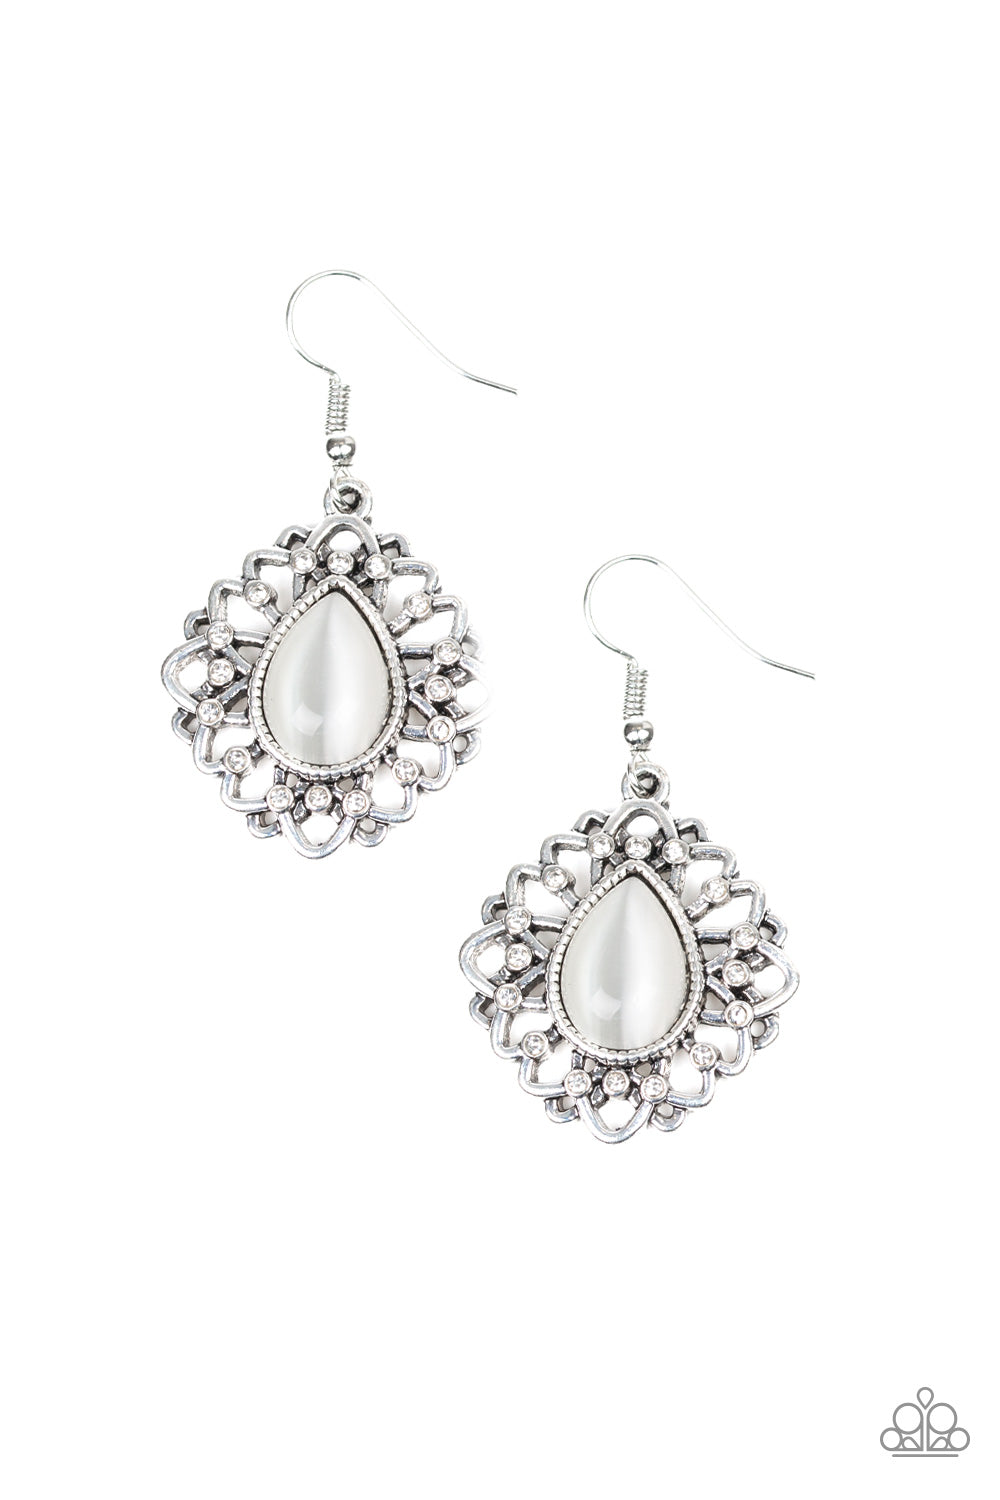 pittmanbling-and-jewelry-inc-presentstotally-glown-away-white-earrings-paparazzi-accessories